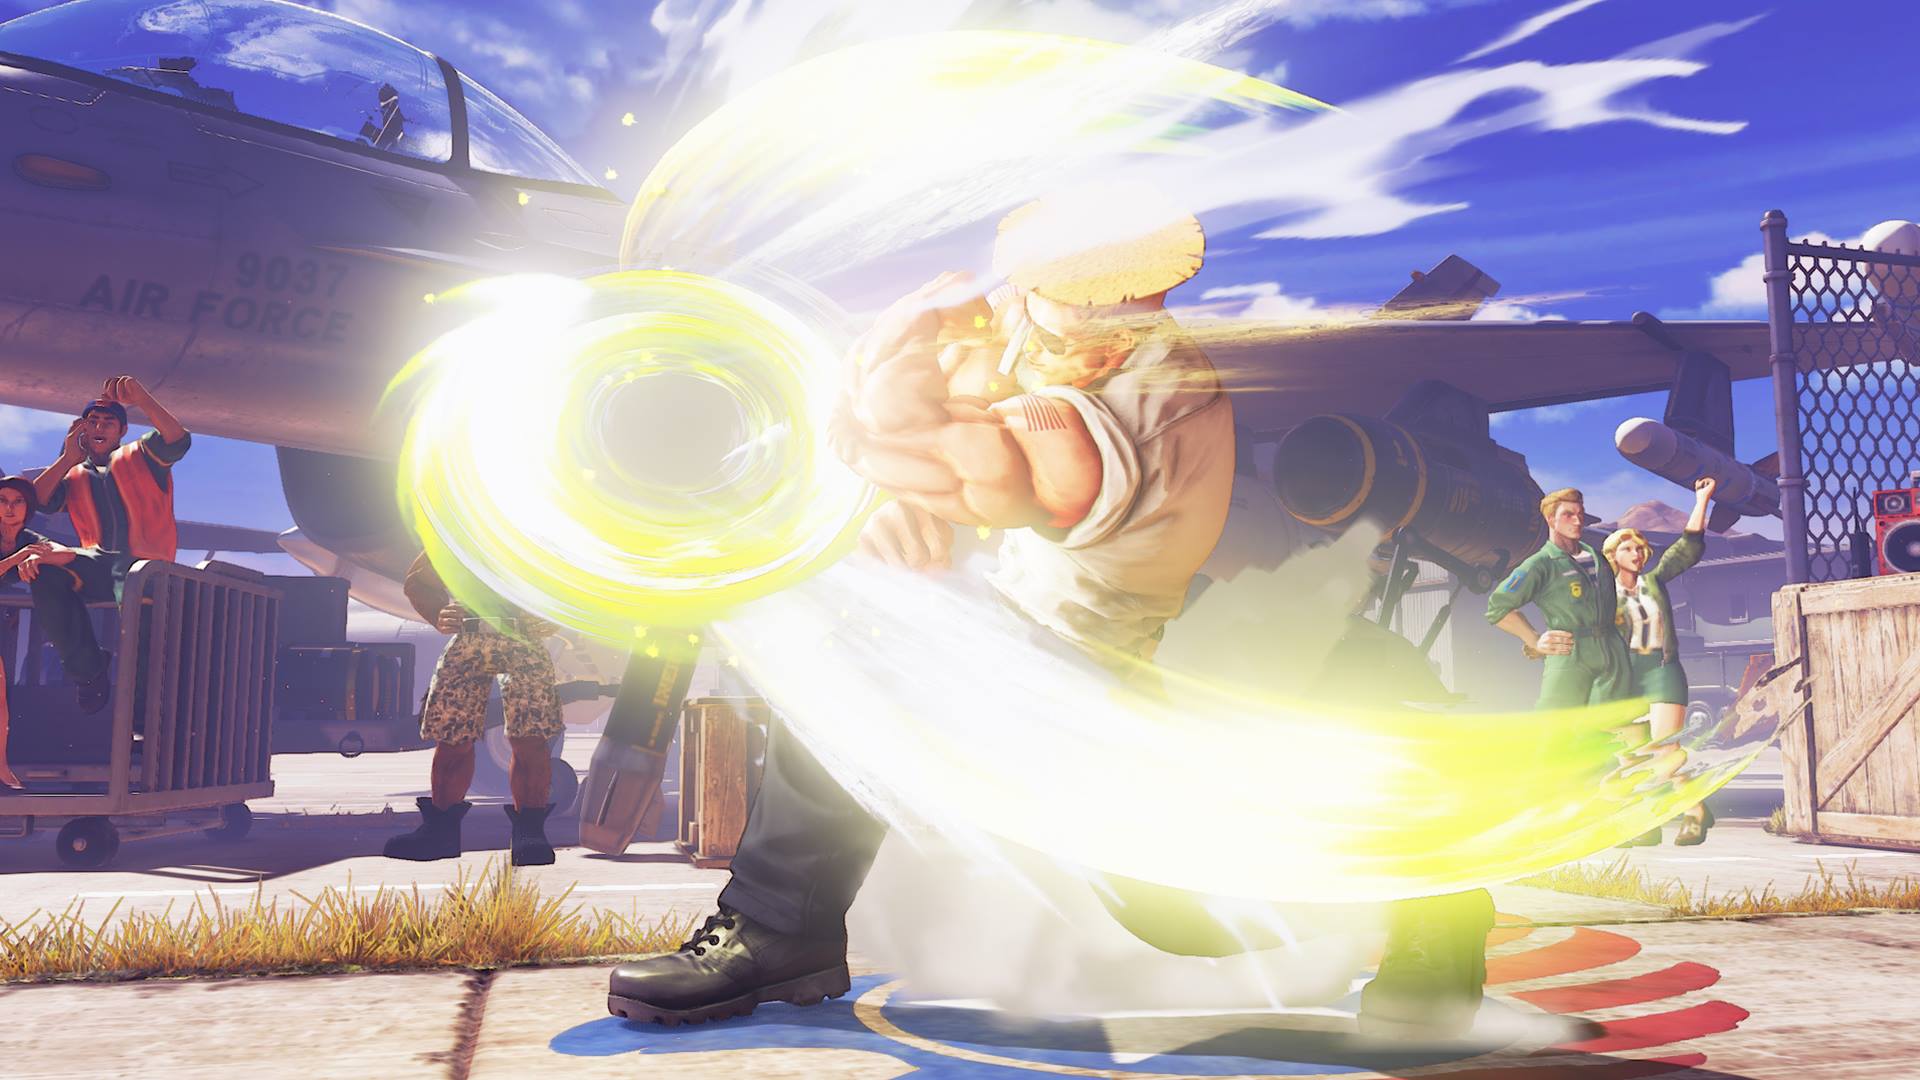 Guile hits Street Fighter V today